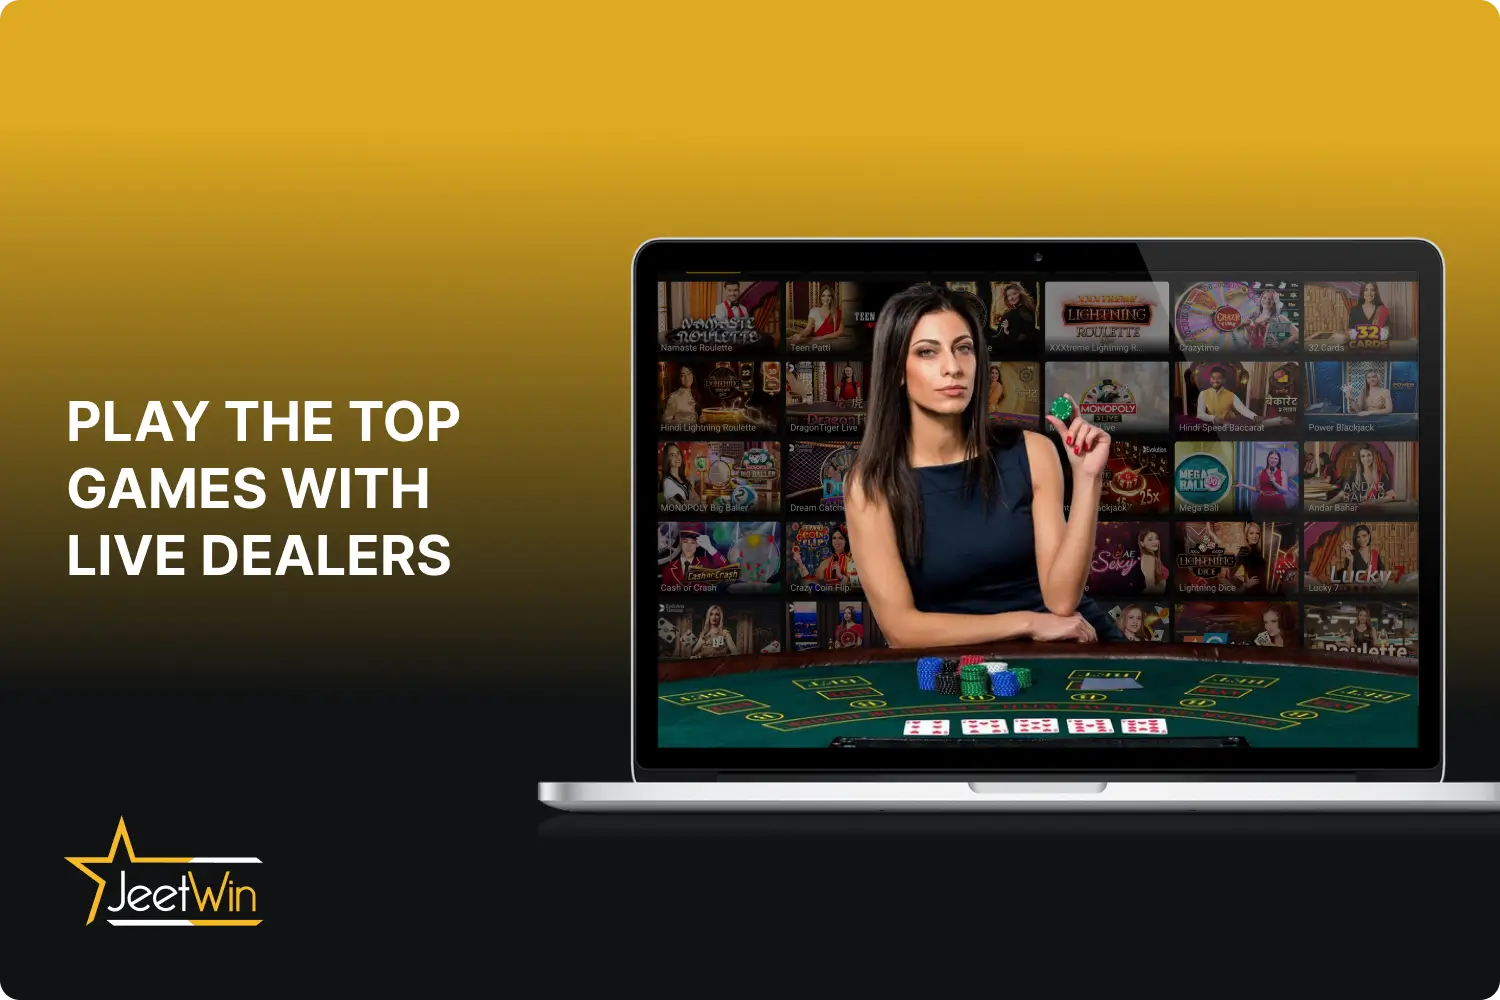 Jeetwin online casino offers users from India to play the top games with live dealers